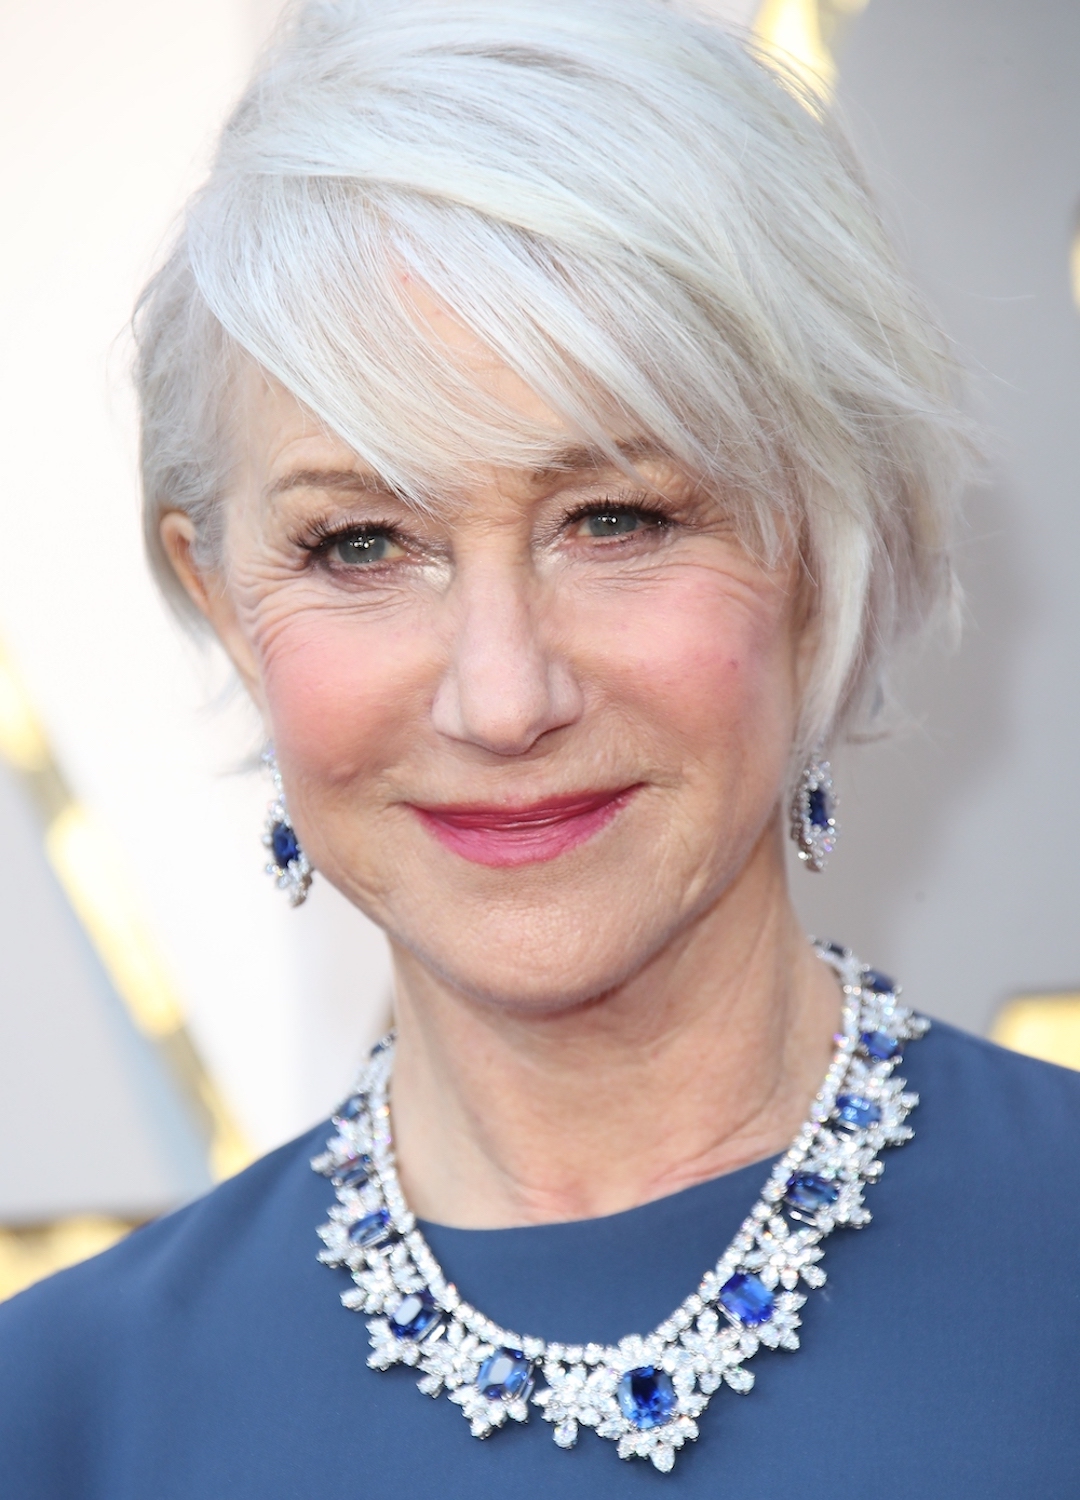 Helen Mirren attends the 90th Annual Academy Awards at Hollywood & Highland Center on March 4, 2018 in Hollywood, California